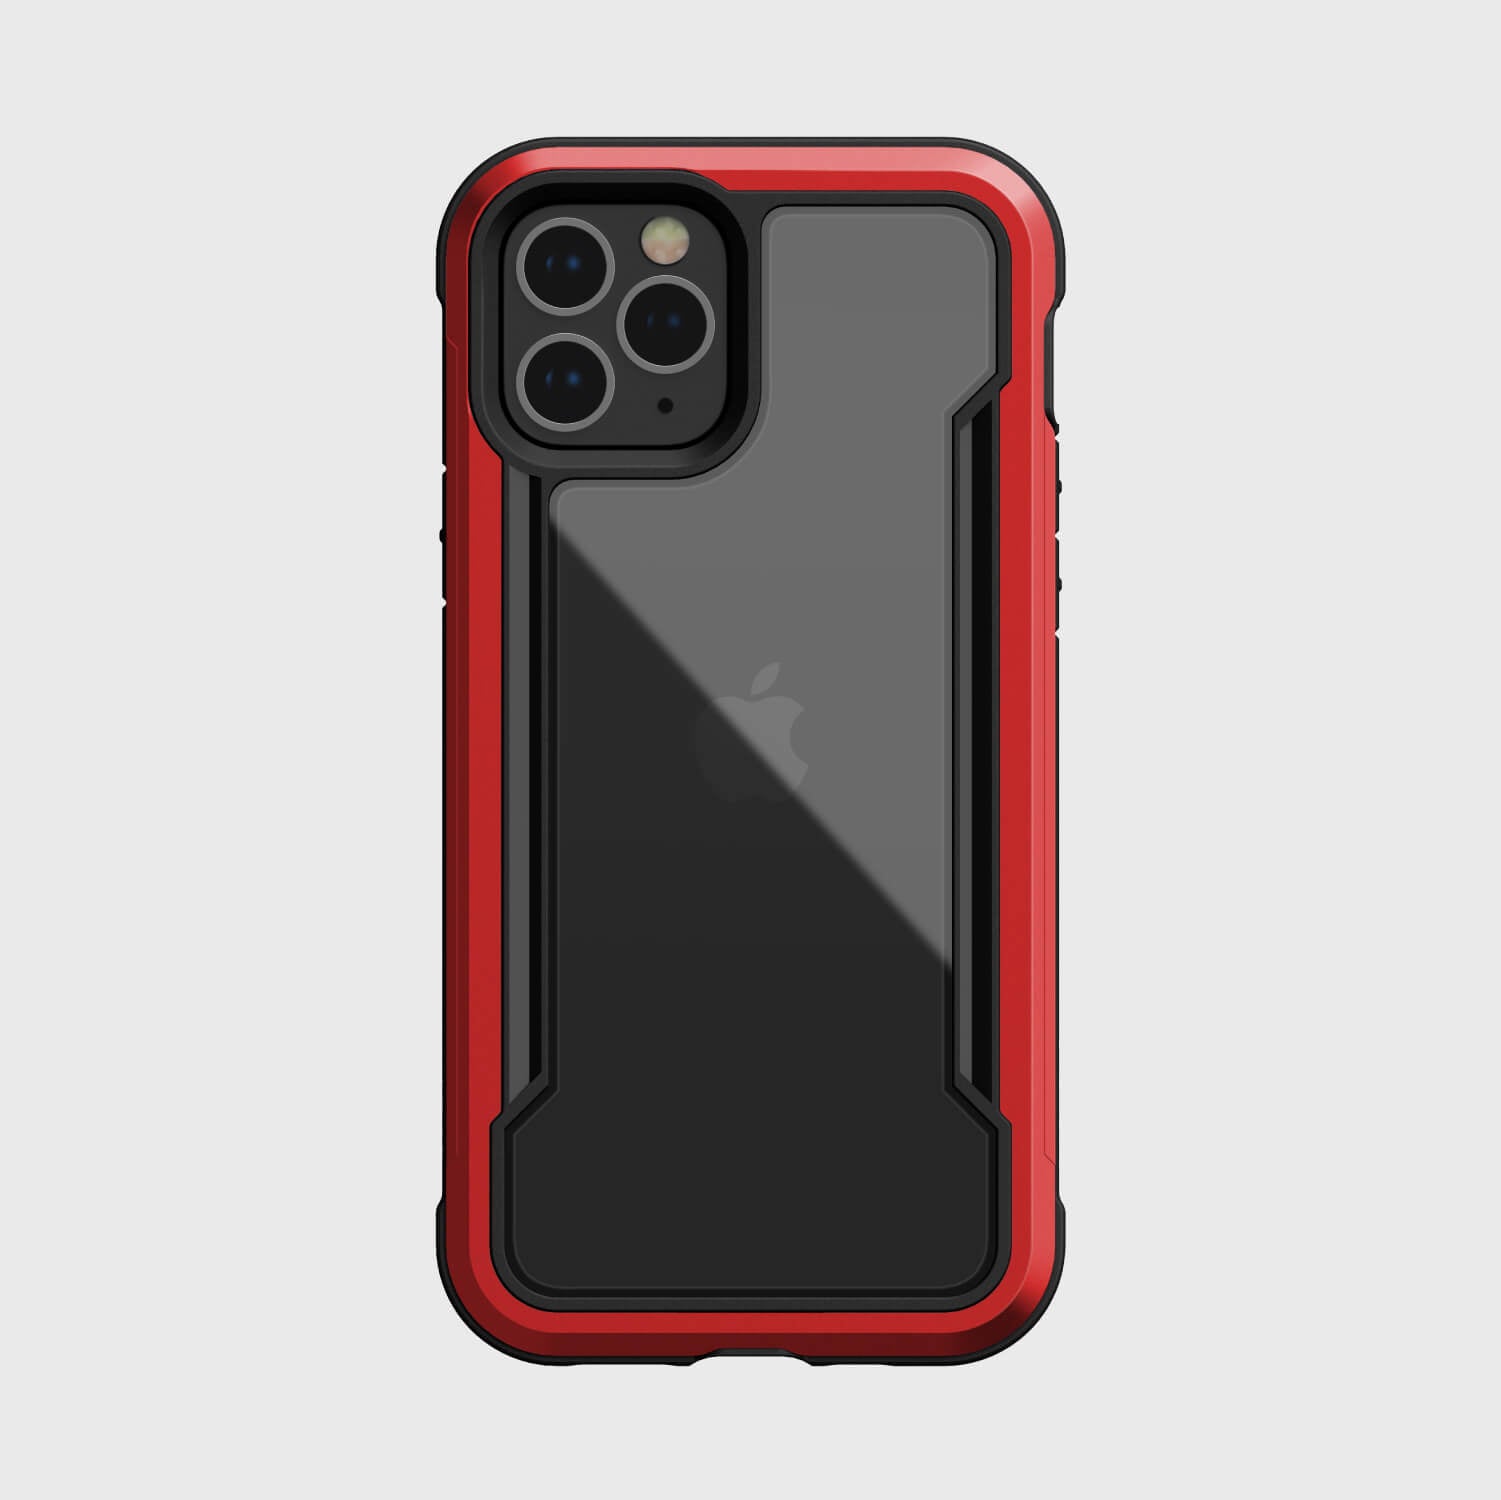 The Raptic SHIELD case for iPhone 12 Pro Max offers foot drop protection with its sleek design in red and black.